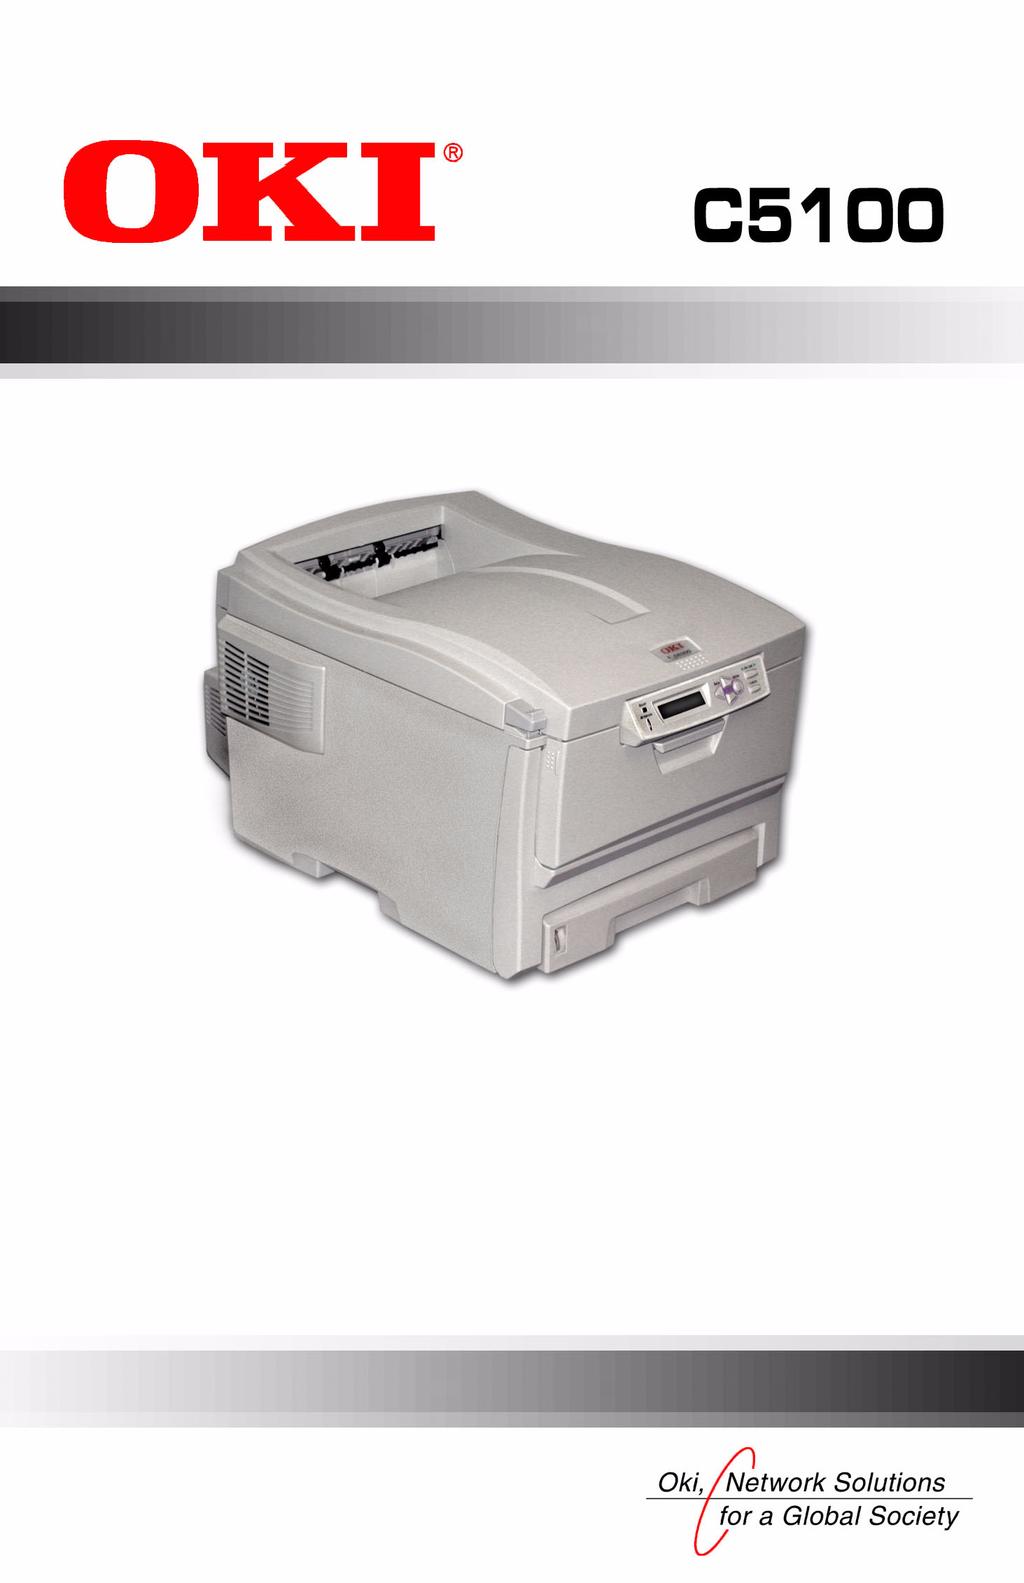 Handy Reference Guide 59344003 Record your printer s Serial Number: For the latest info, go to http://my.okidata.